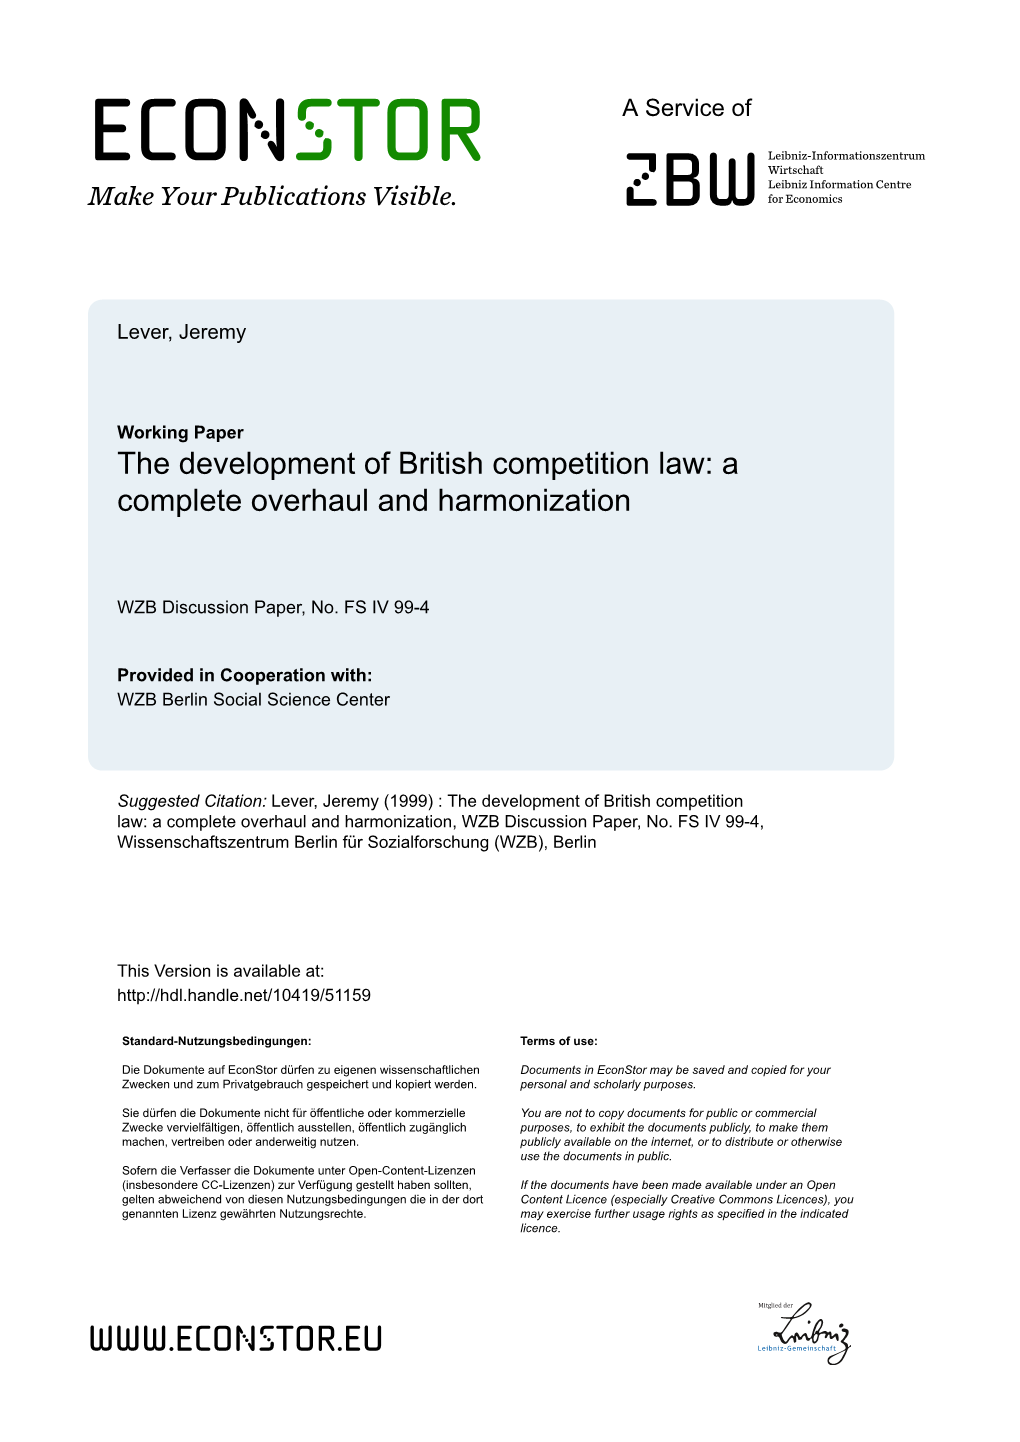 The Development of British Competition Law: a Complete Overhaul and Harmonization